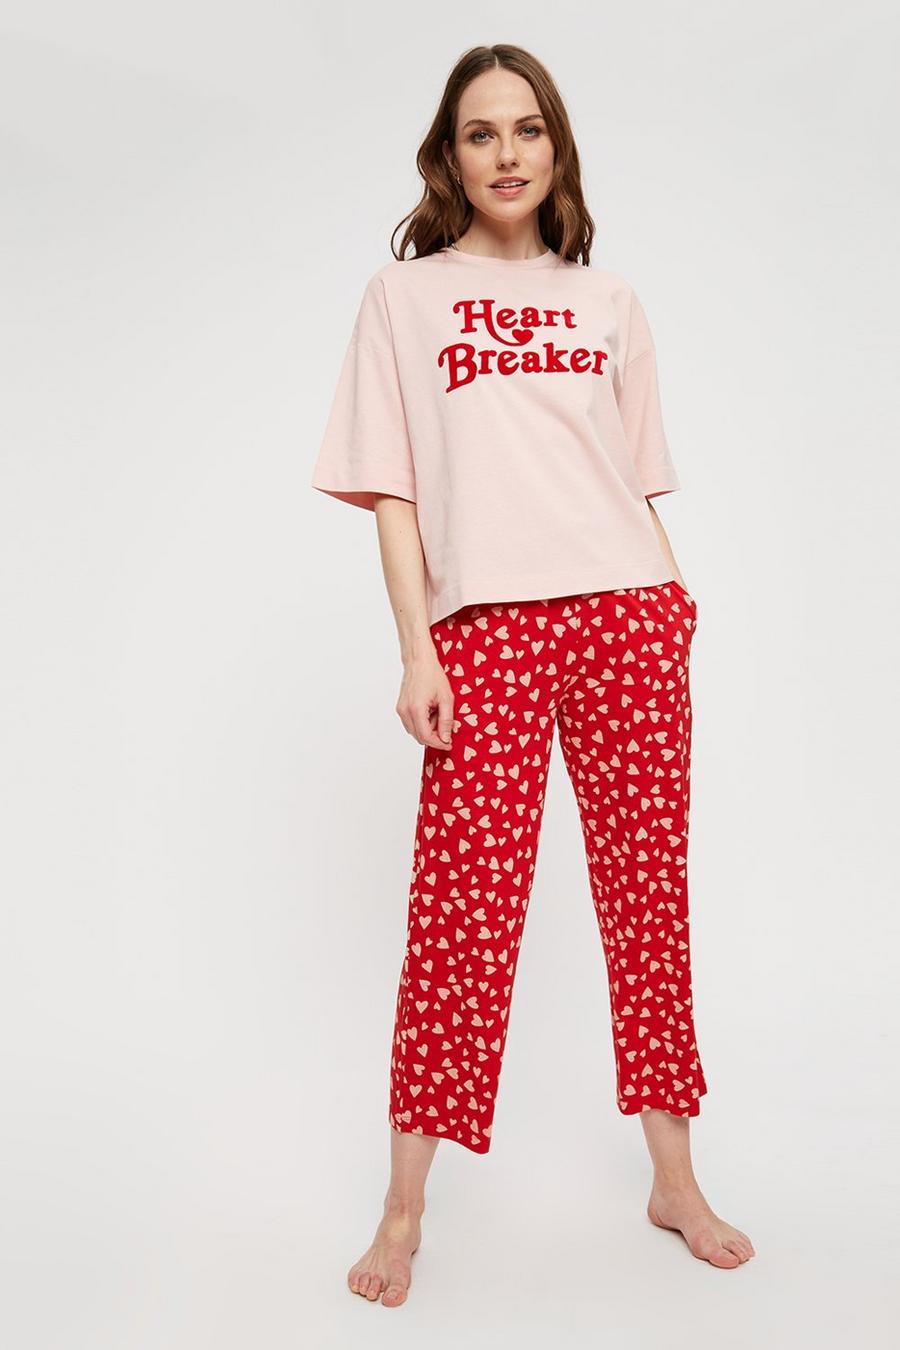 Heart Breaker T-Shirt And Heart Wide Pant